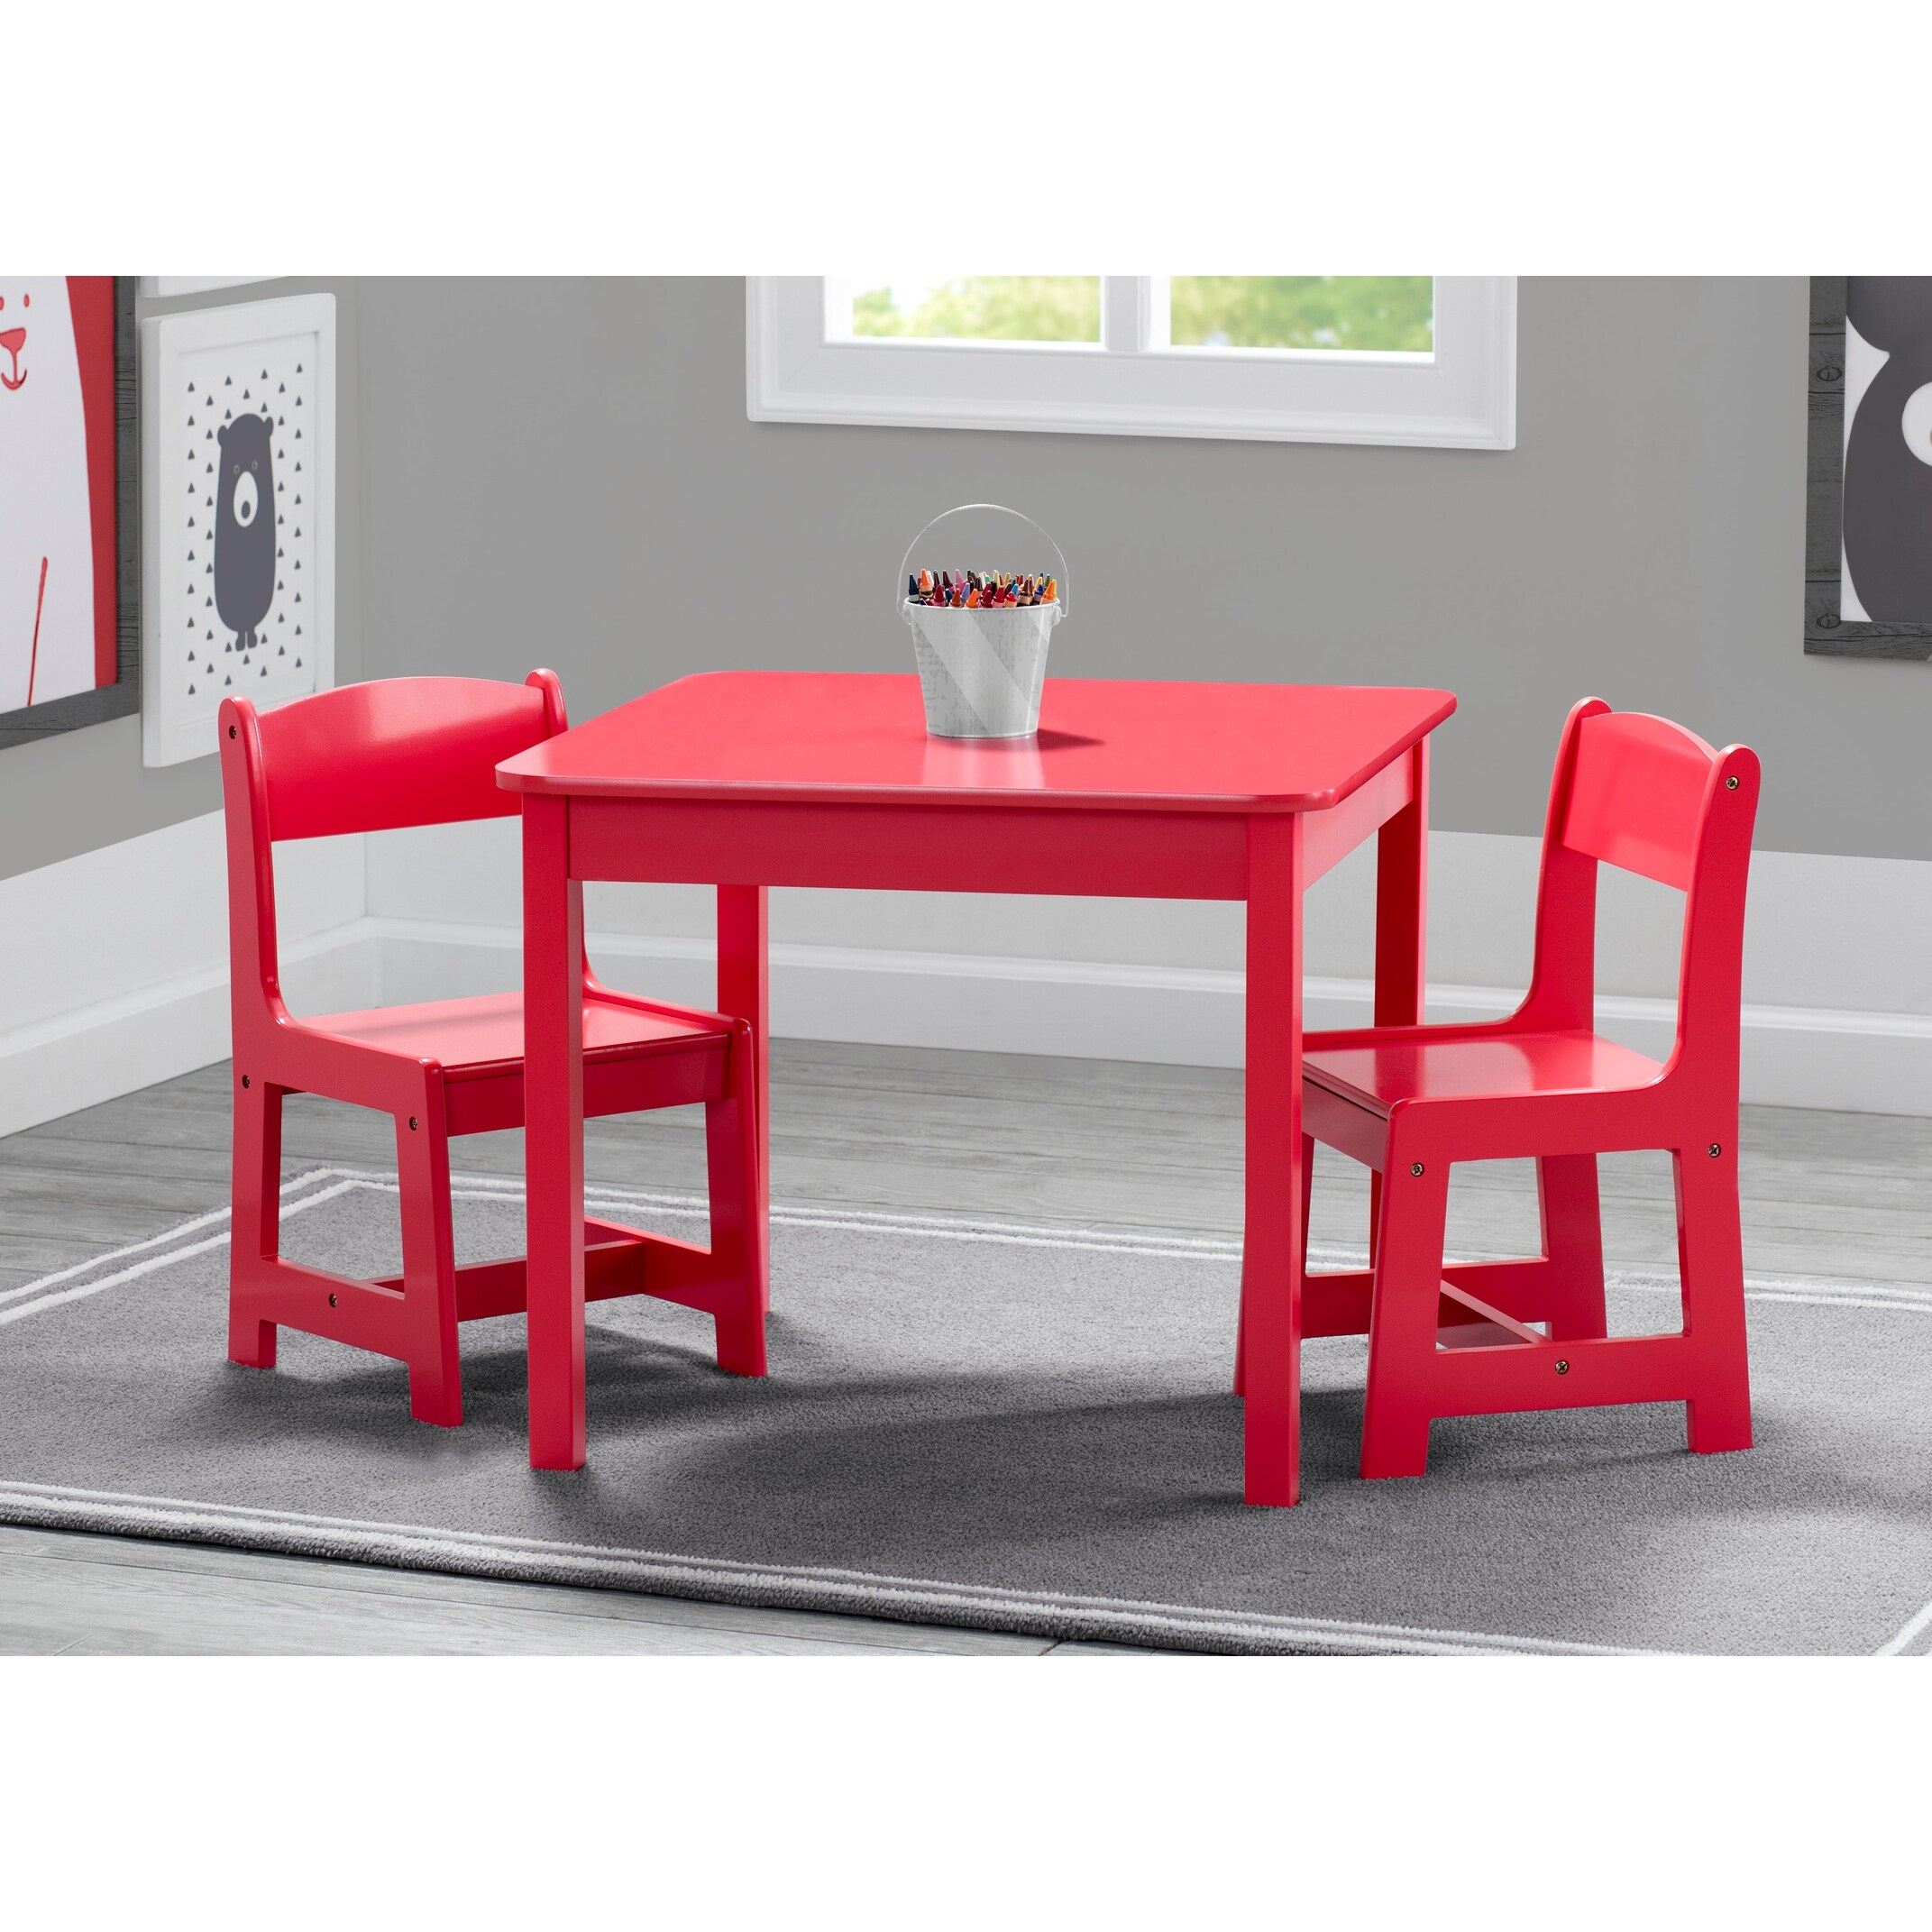 Delta Children MySize Kids Wood Table and Chair Set - Overstock 